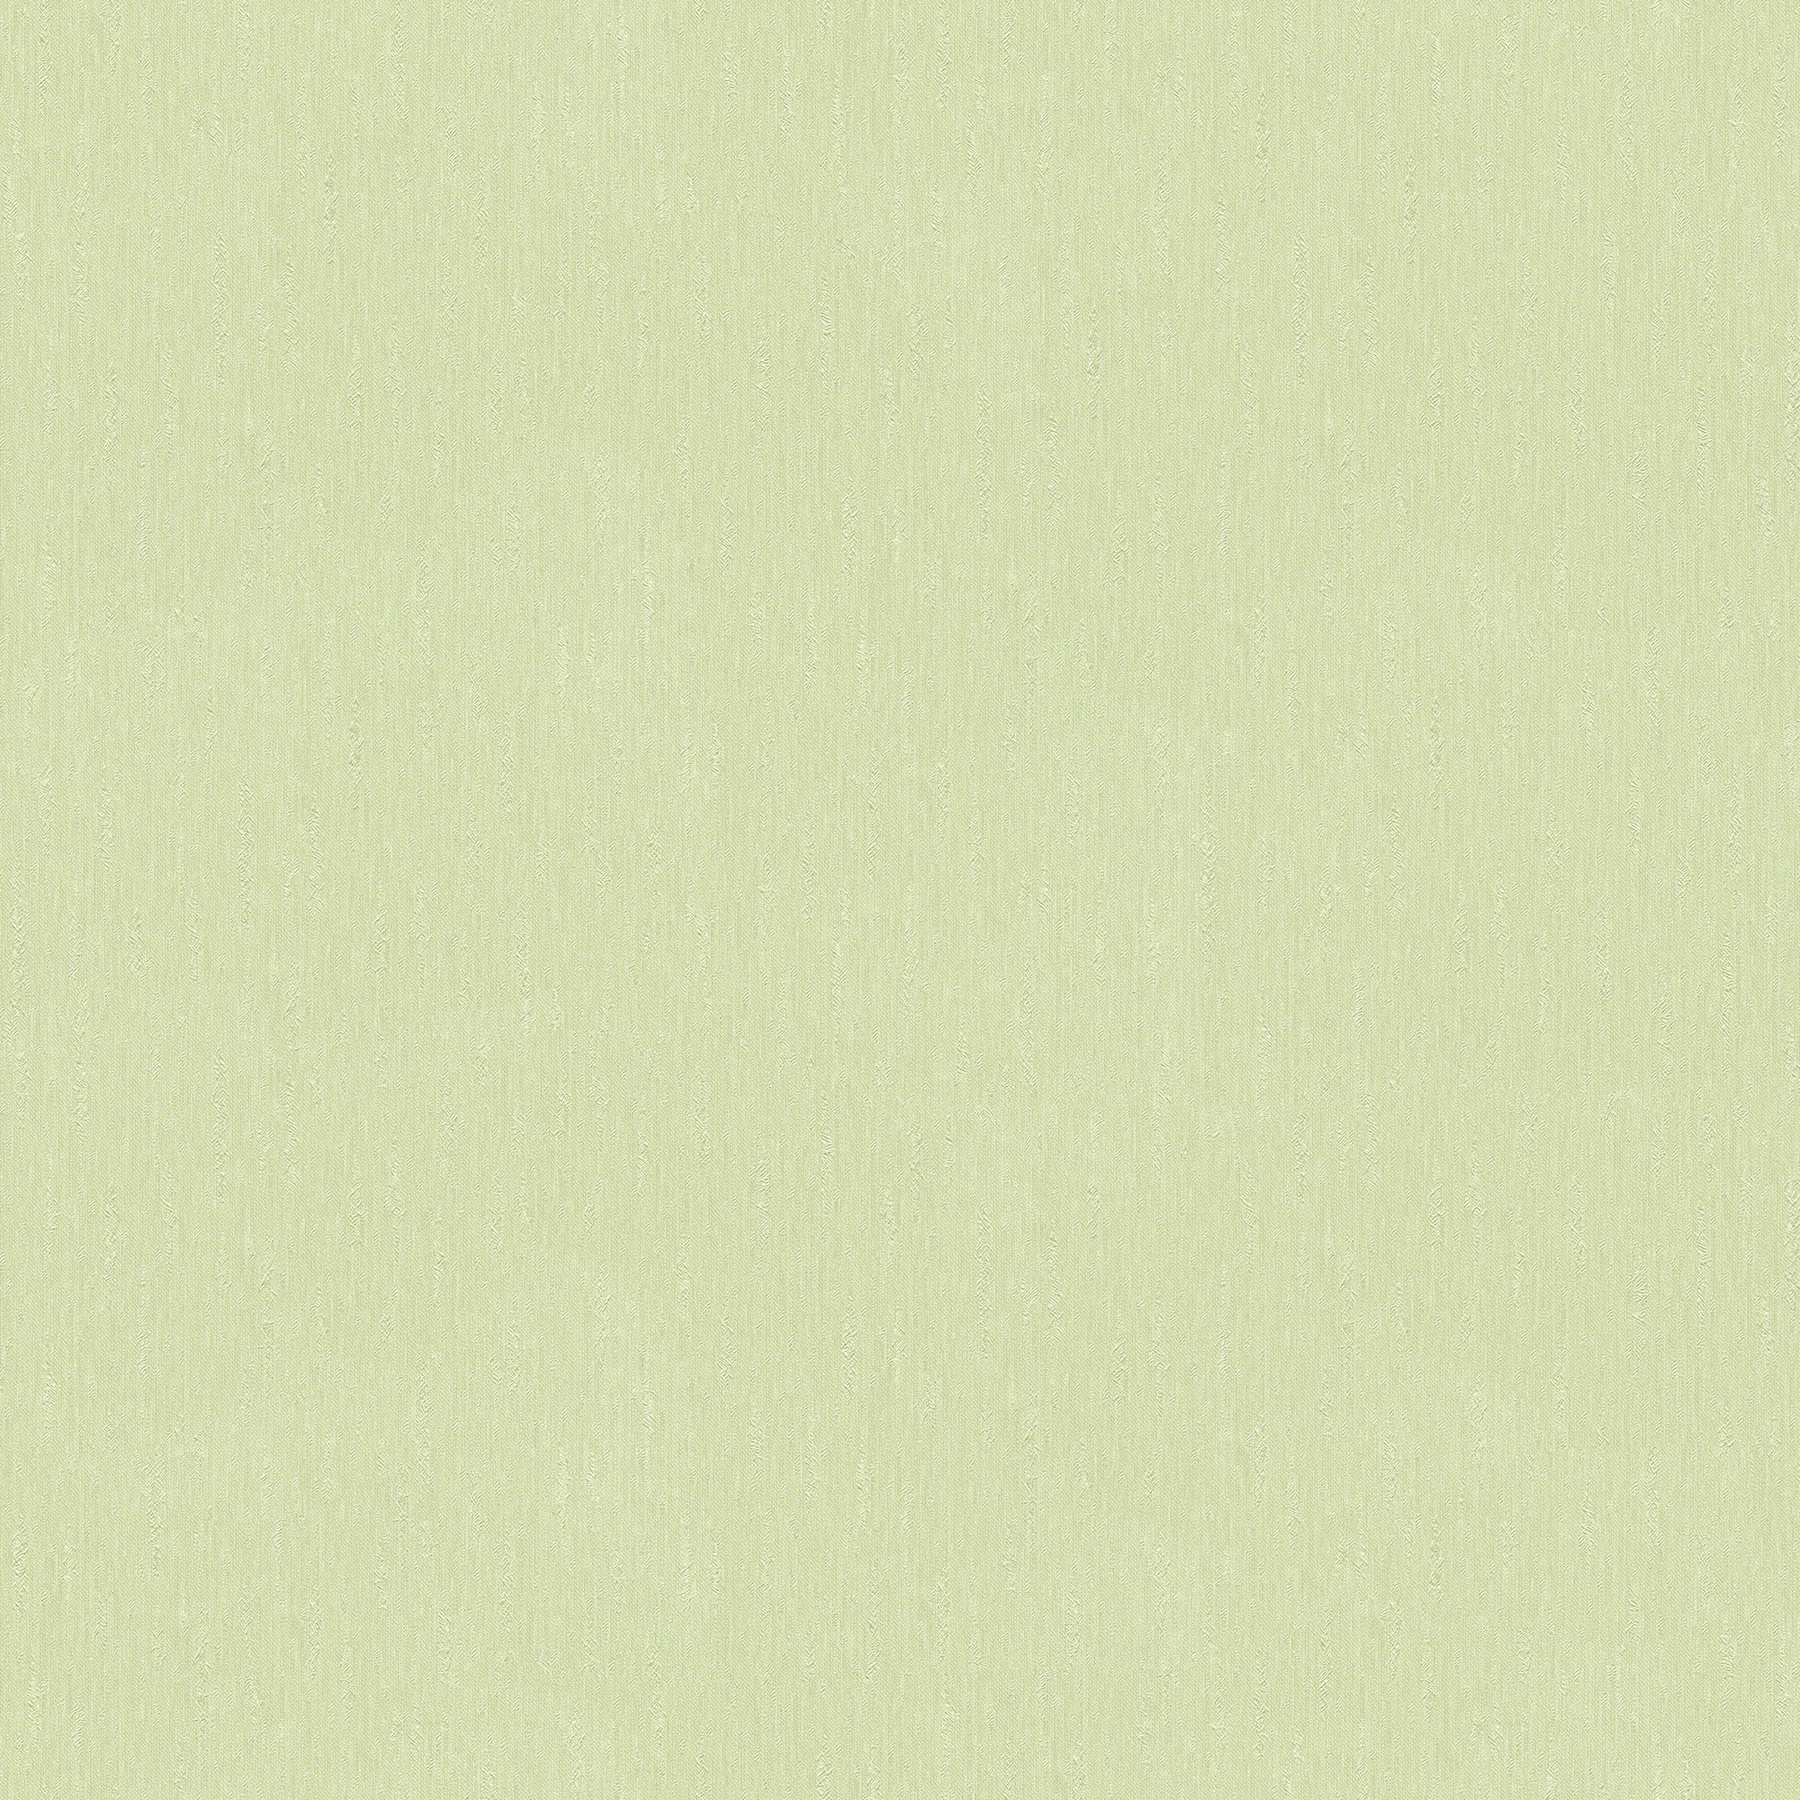 Wallpaper spring green with natural texture pattern - green
